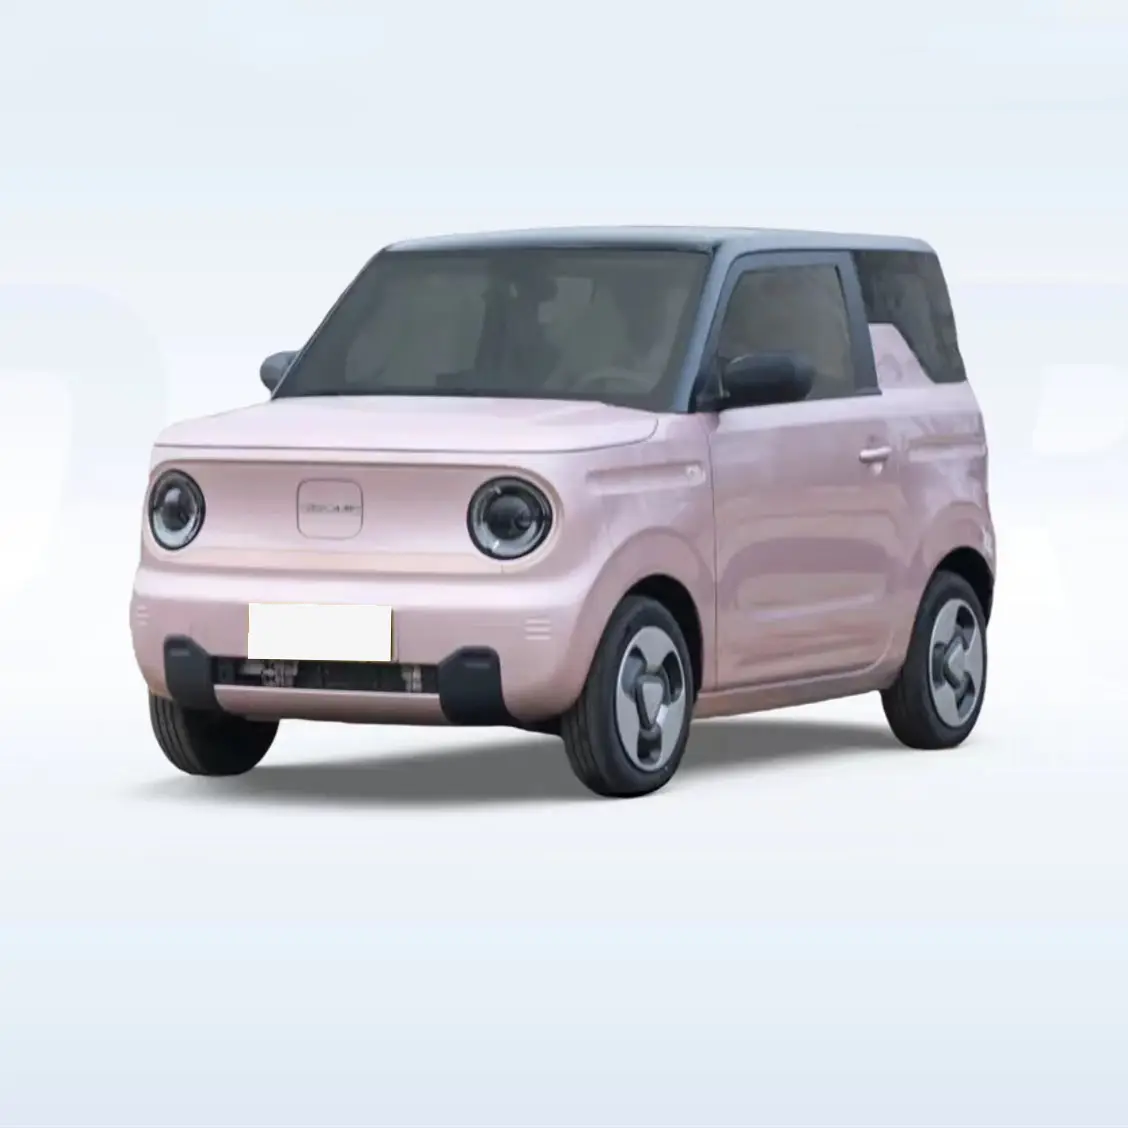 China manufacturer cheapest electric mini car for adults Geely Panda mini 27hp NEDC range 120km speed 100km/h